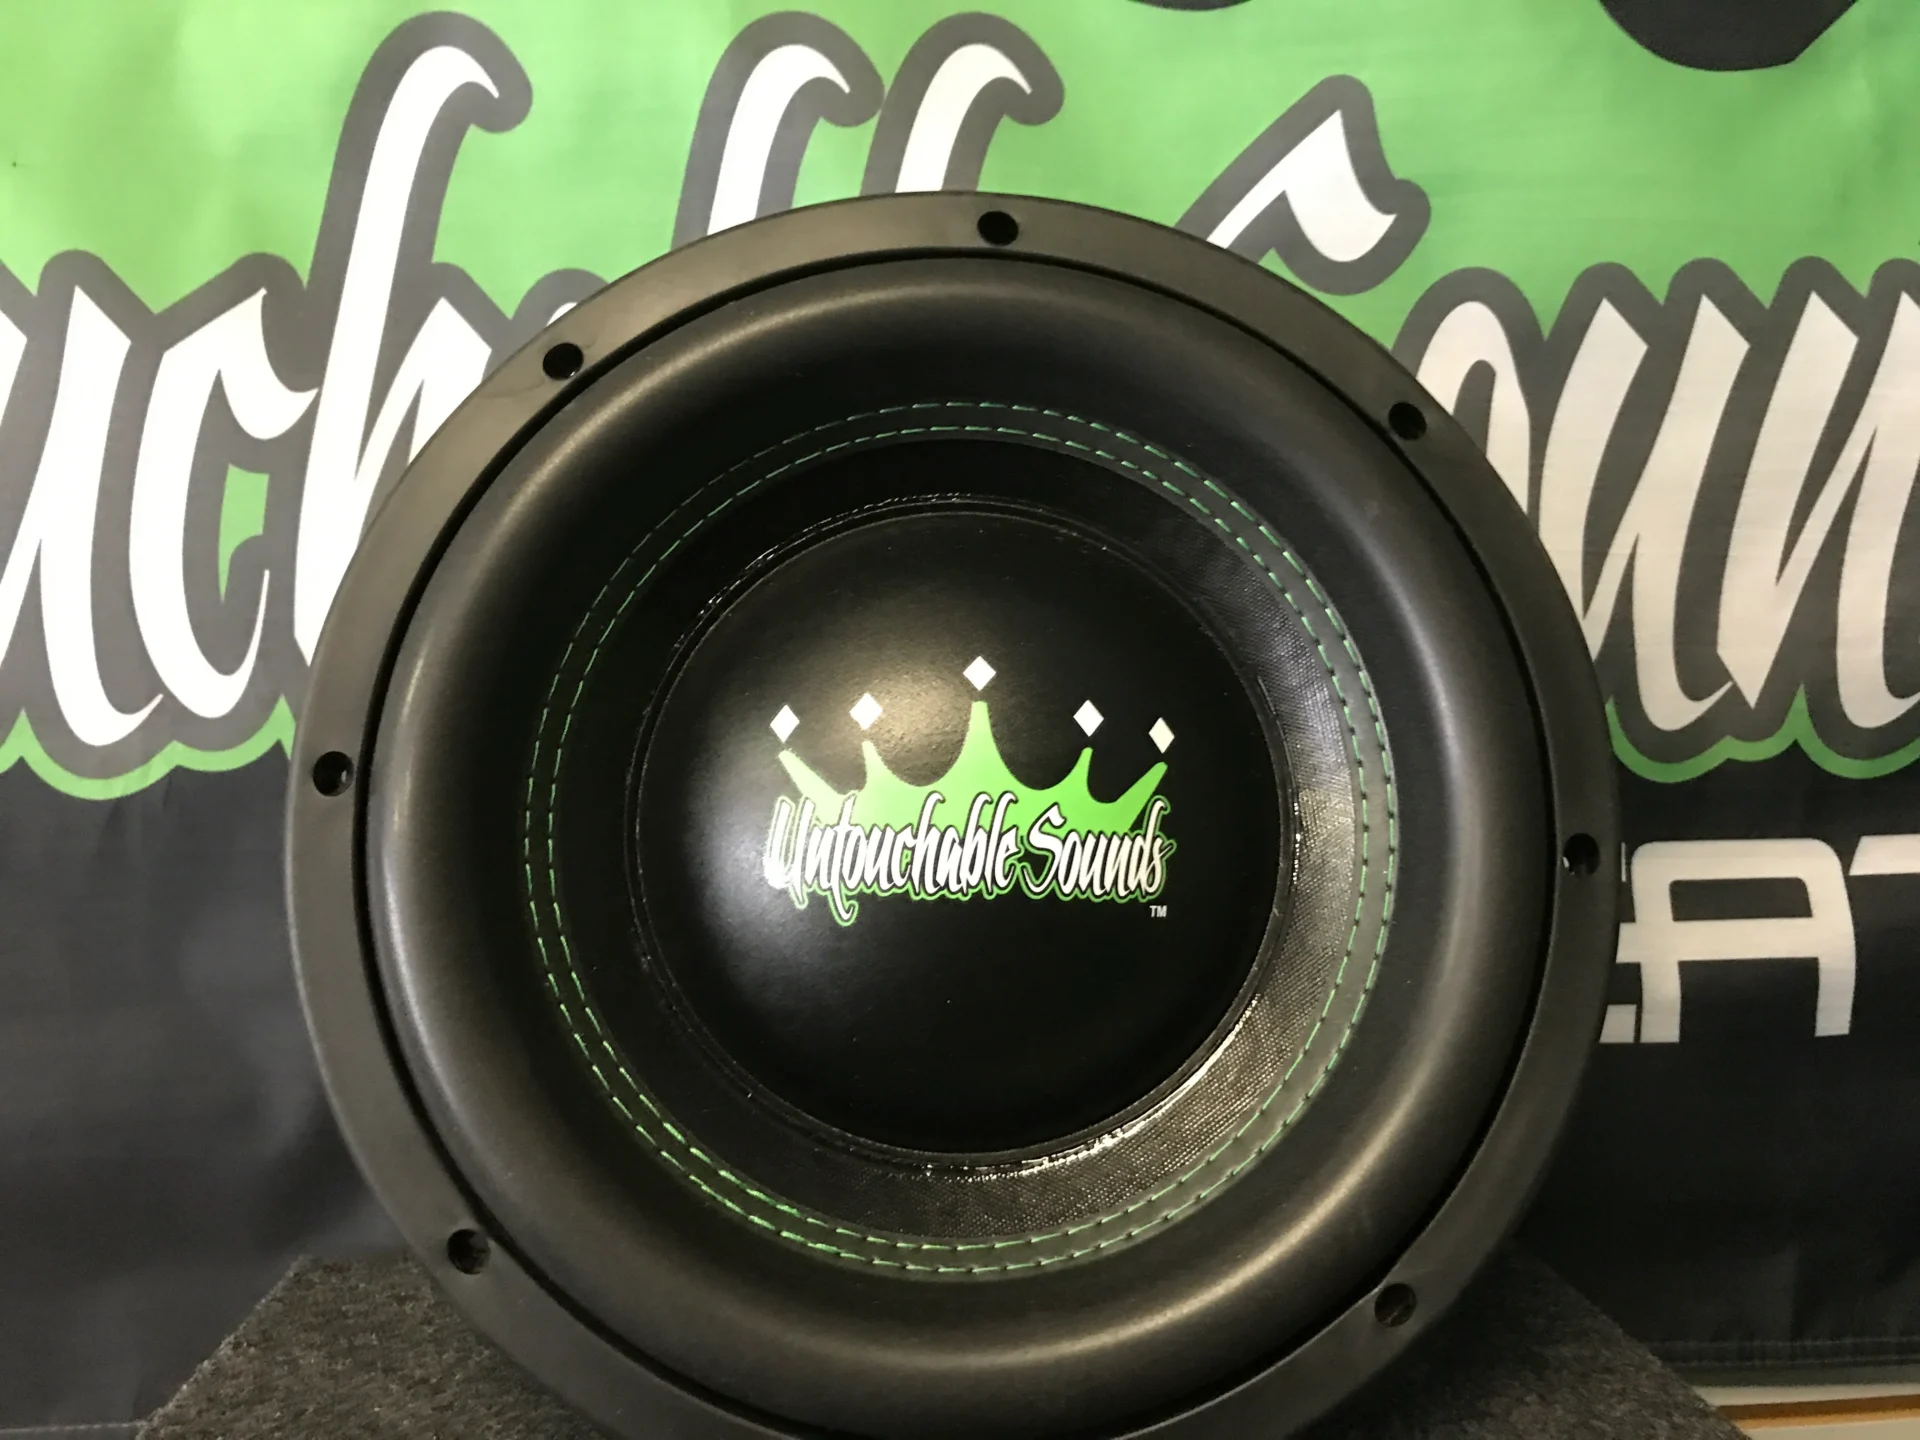 Untouchable Sounds Prince Series 10 Speakers